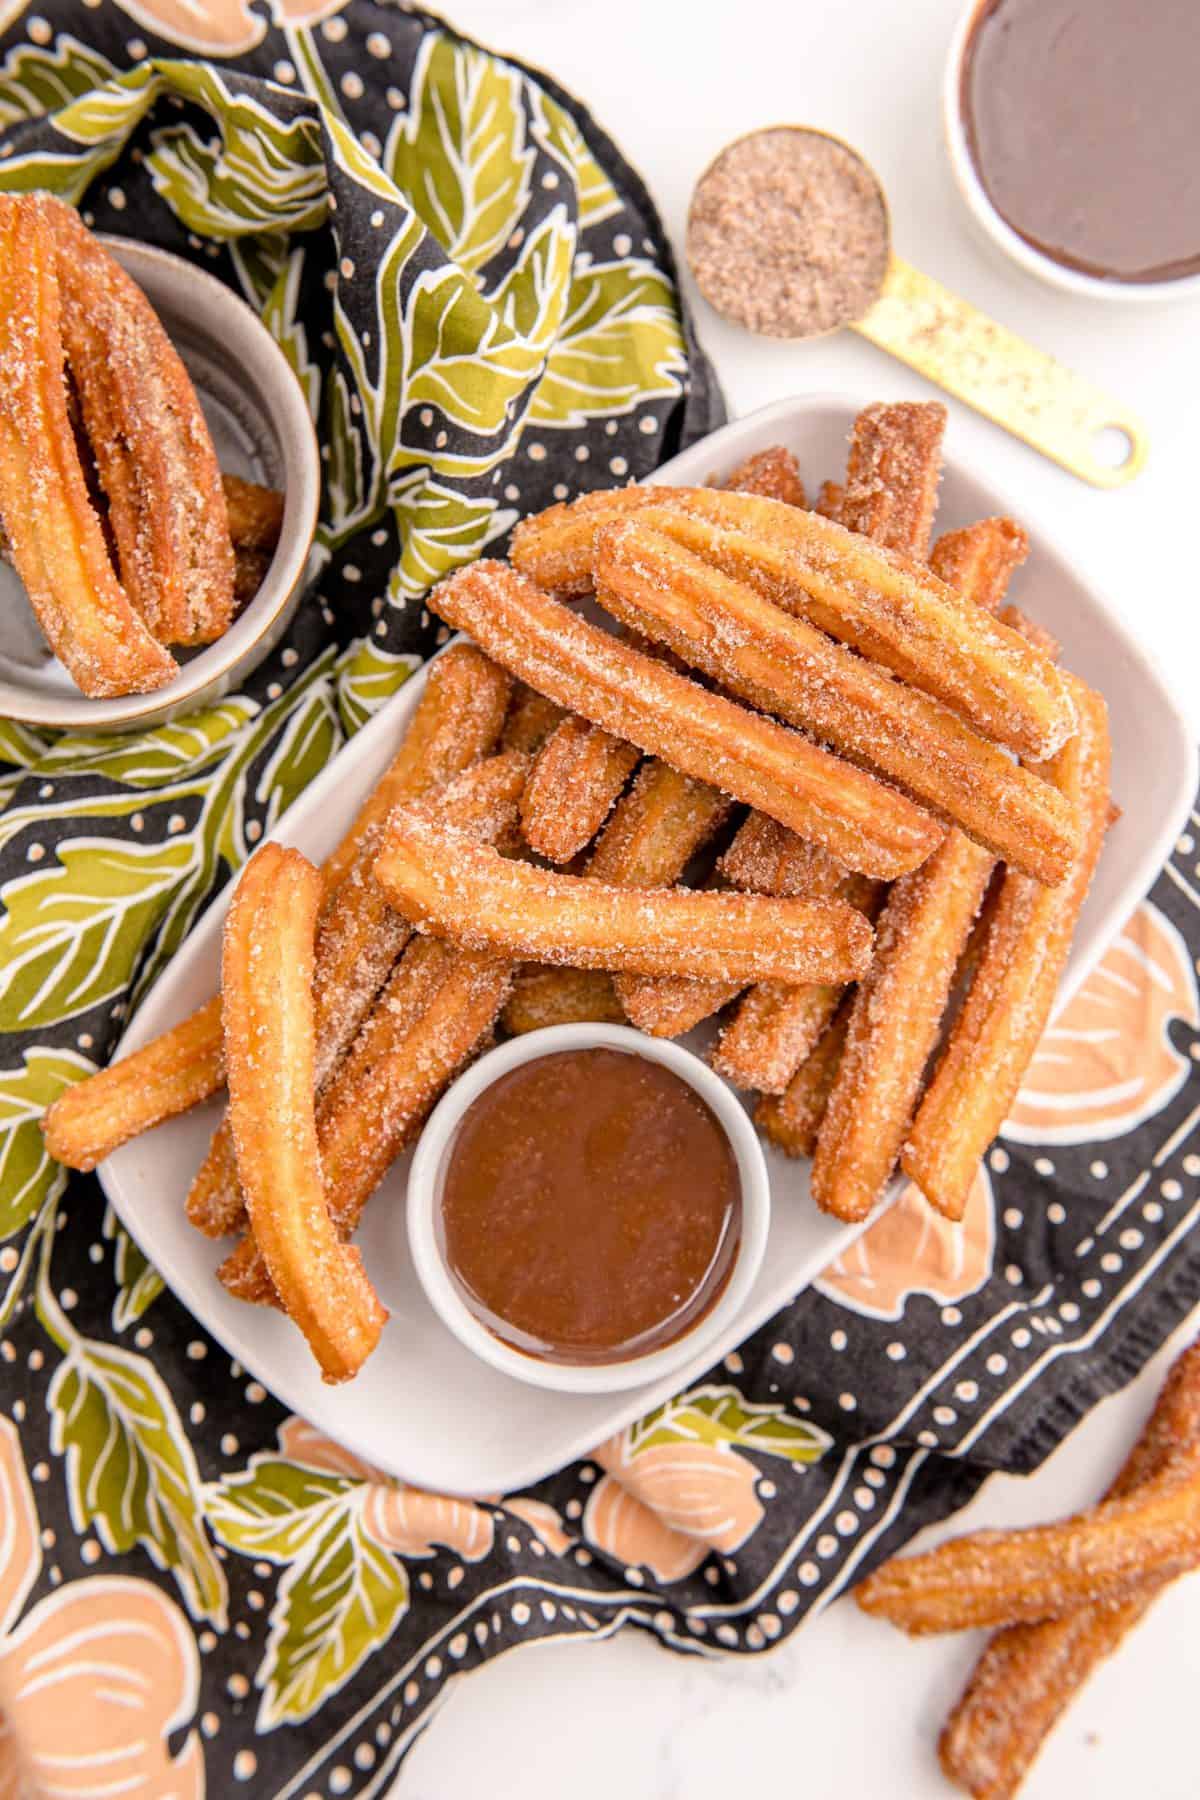 Overhead shot of a plate of churros and chocolate sauce.